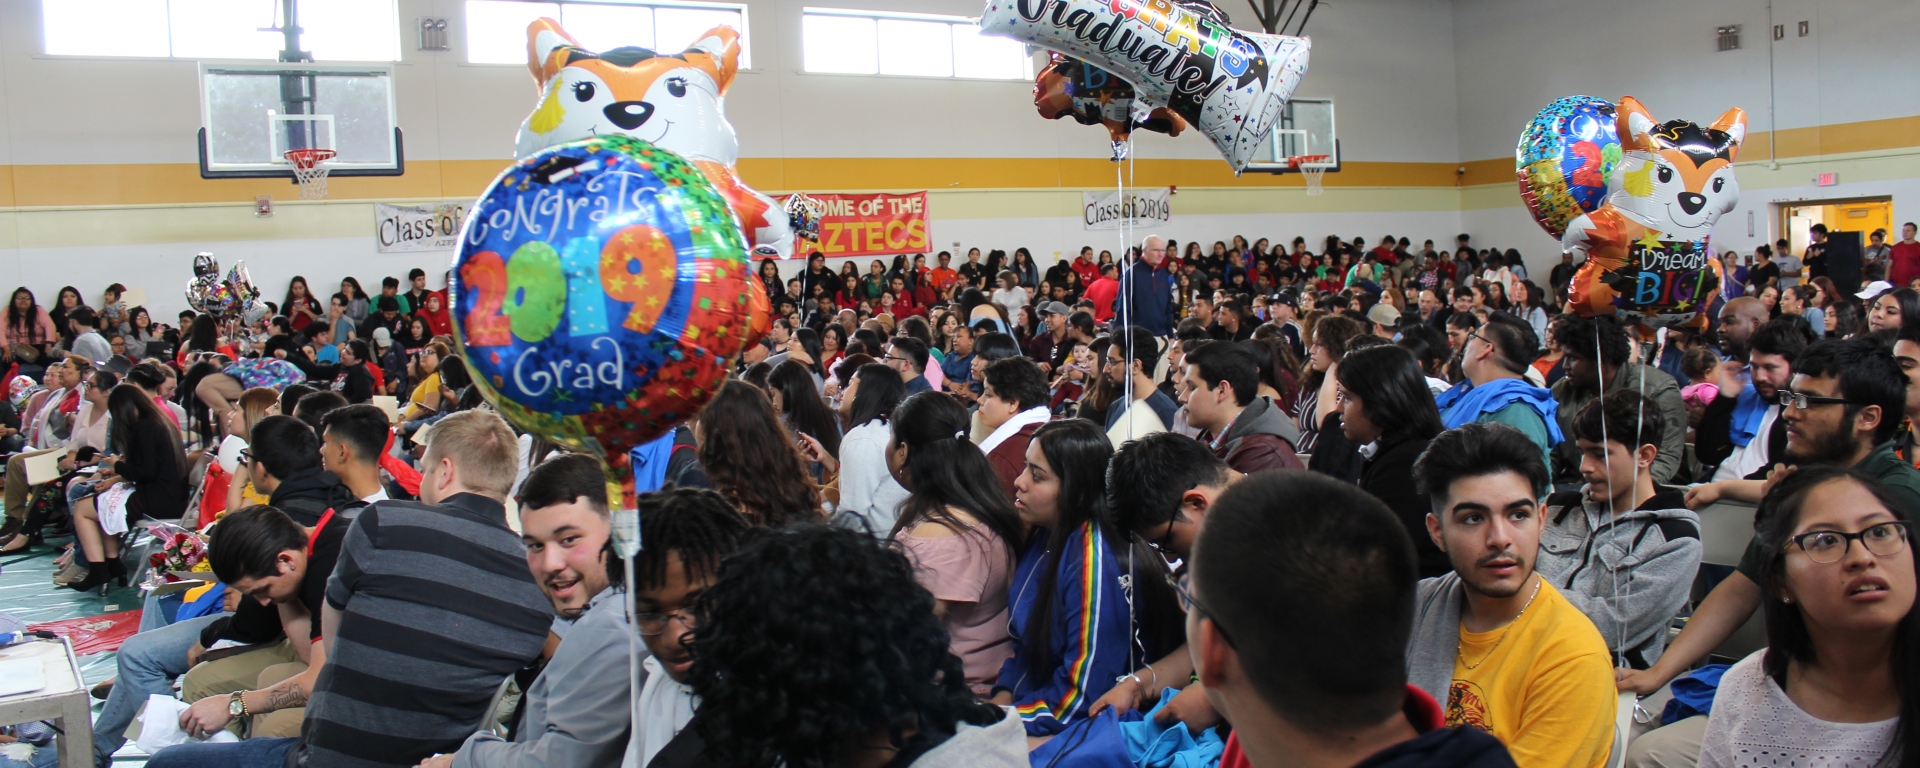 On May 10, the annual Senior Signing Ceremony took place. All of the Seniors were buzzed and ready to walk down the aisle to their favorite song with their friends.